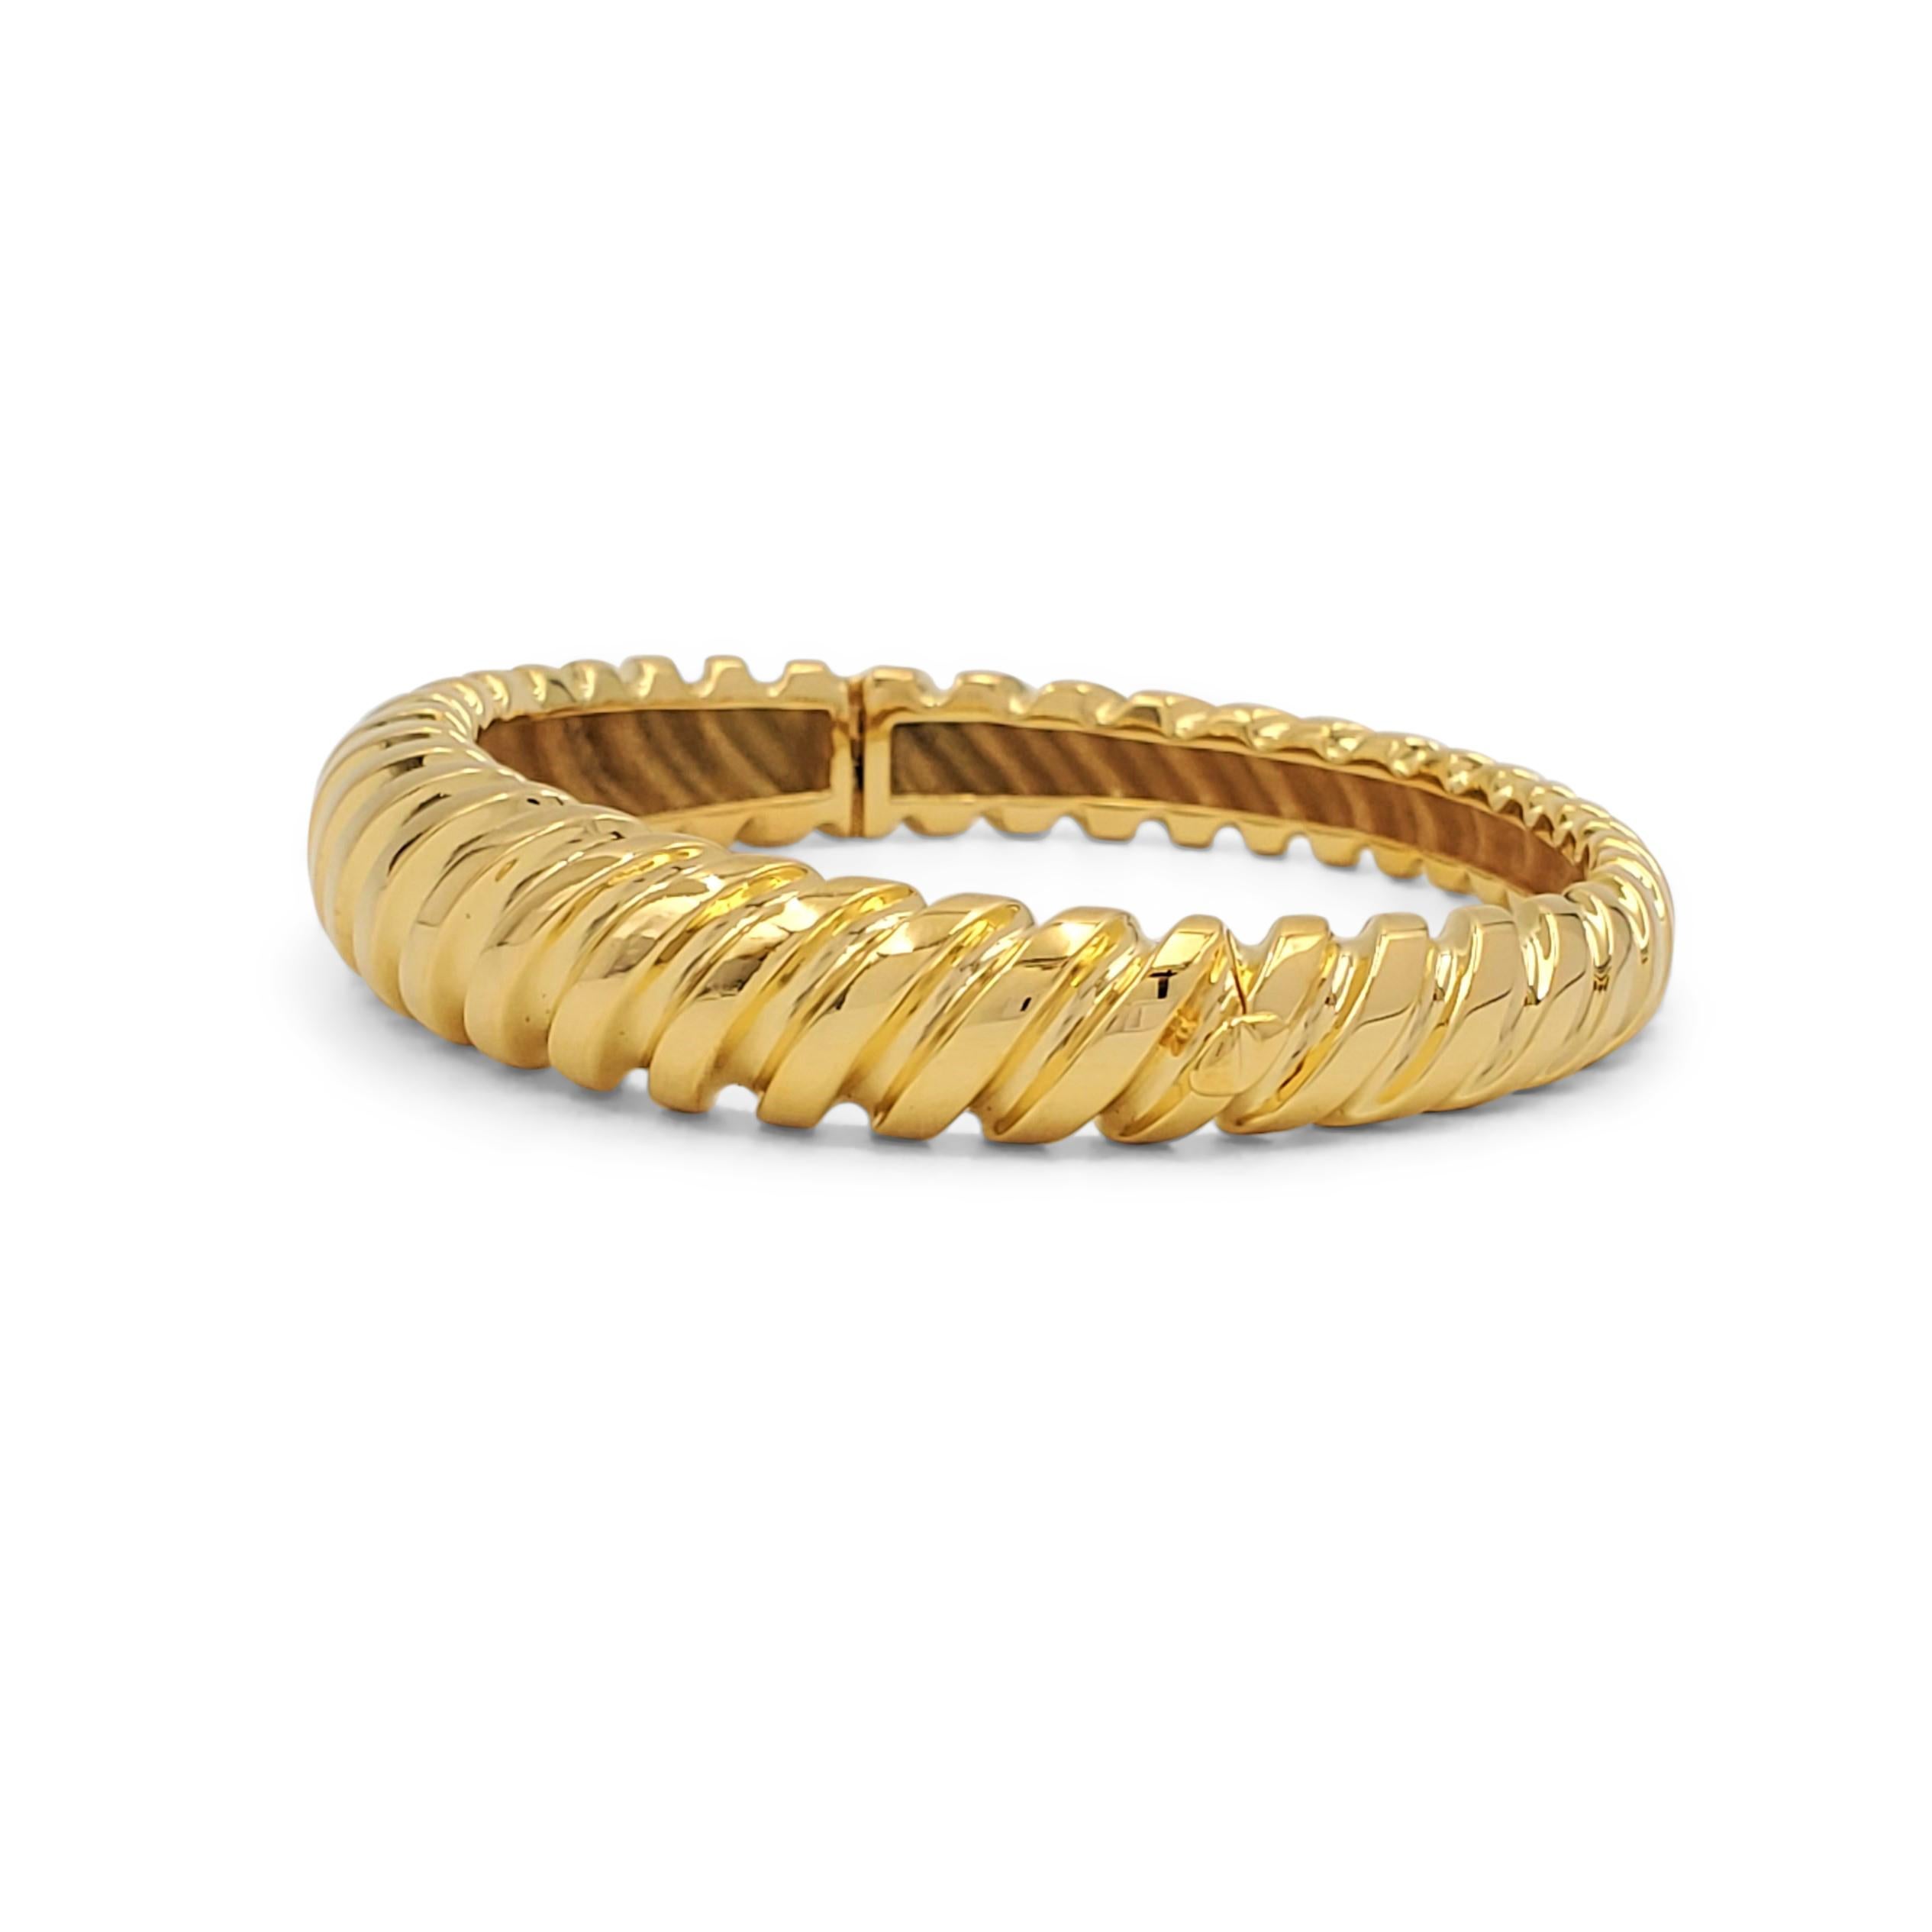 A wearable hinged bangle bracelet crafted in 18 karat yellow gold. No makers marks or hallmarks present. The bracelet is not presented with the original box or papers. CIRCA 1990s. 

Bracelet Size: Will fit up to 7-inch wrist
Box: No
Papers: No